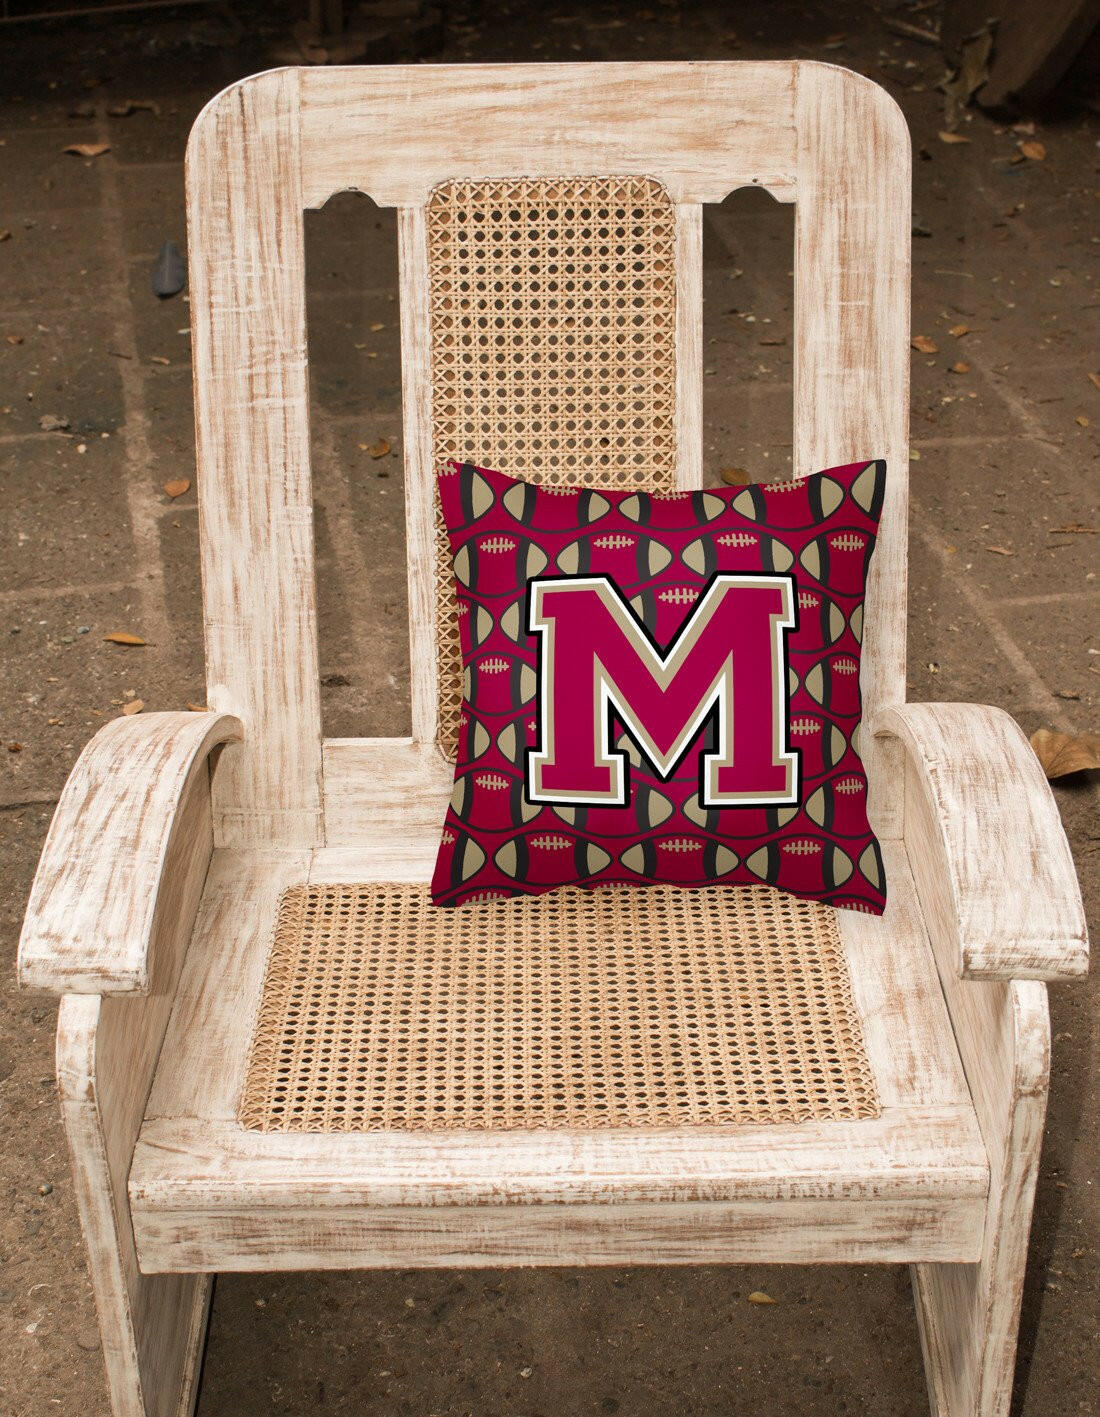 Letter M Football Garnet and Gold Fabric Decorative Pillow CJ1078-MPW1414 by Caroline's Treasures